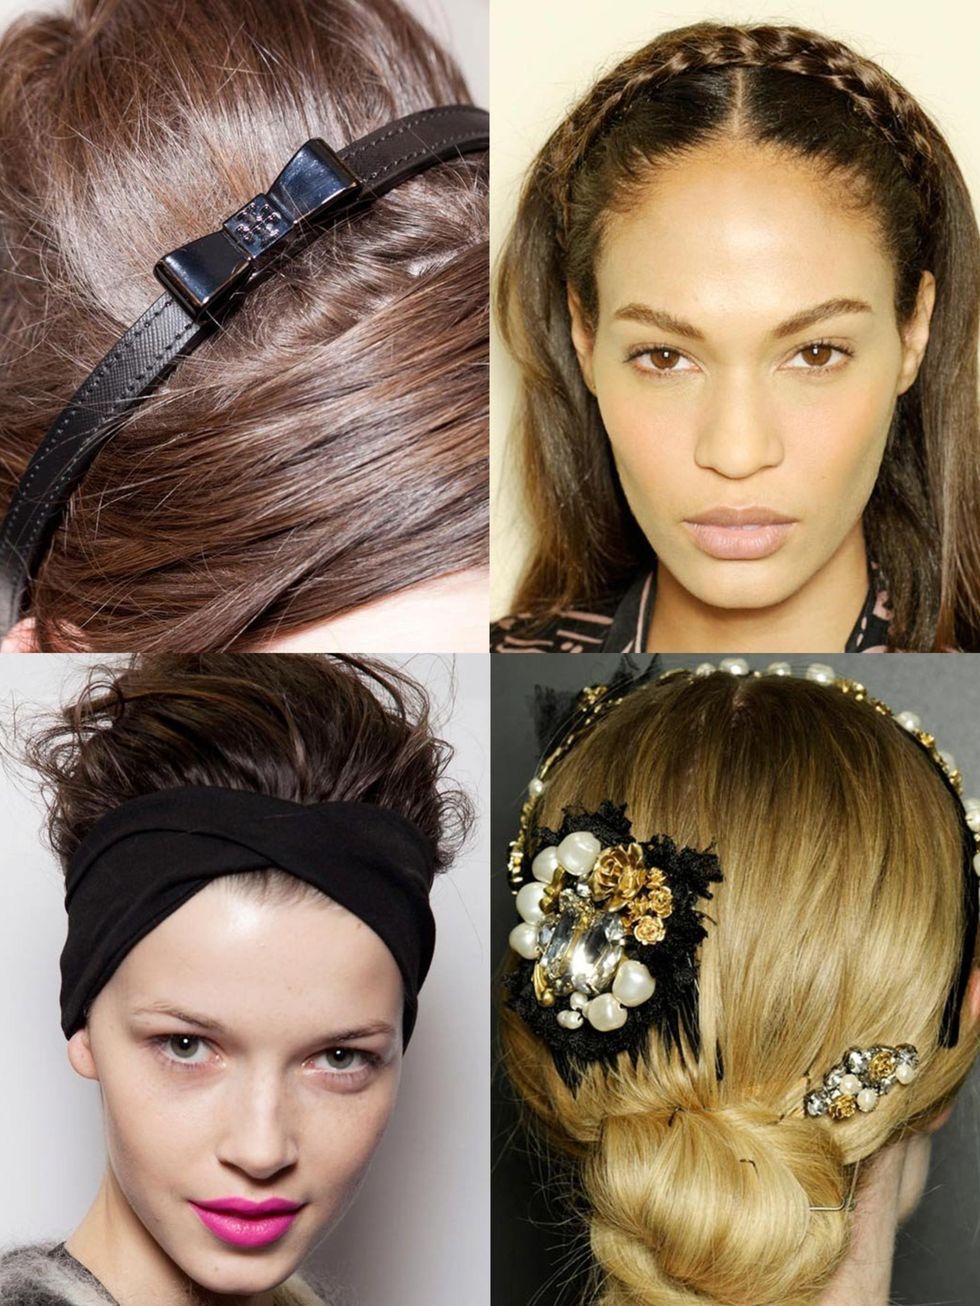 &lt;p&gt;&lt;a href=&quot;http://www.elleuk.com/catwalk&quot;&gt;Catwalk&lt;/a&gt; hairstyles can seem daunting to recreate at home, then to actually head out in public wearing them, well you would need to be quite brave. But if you dissect the hairstyles